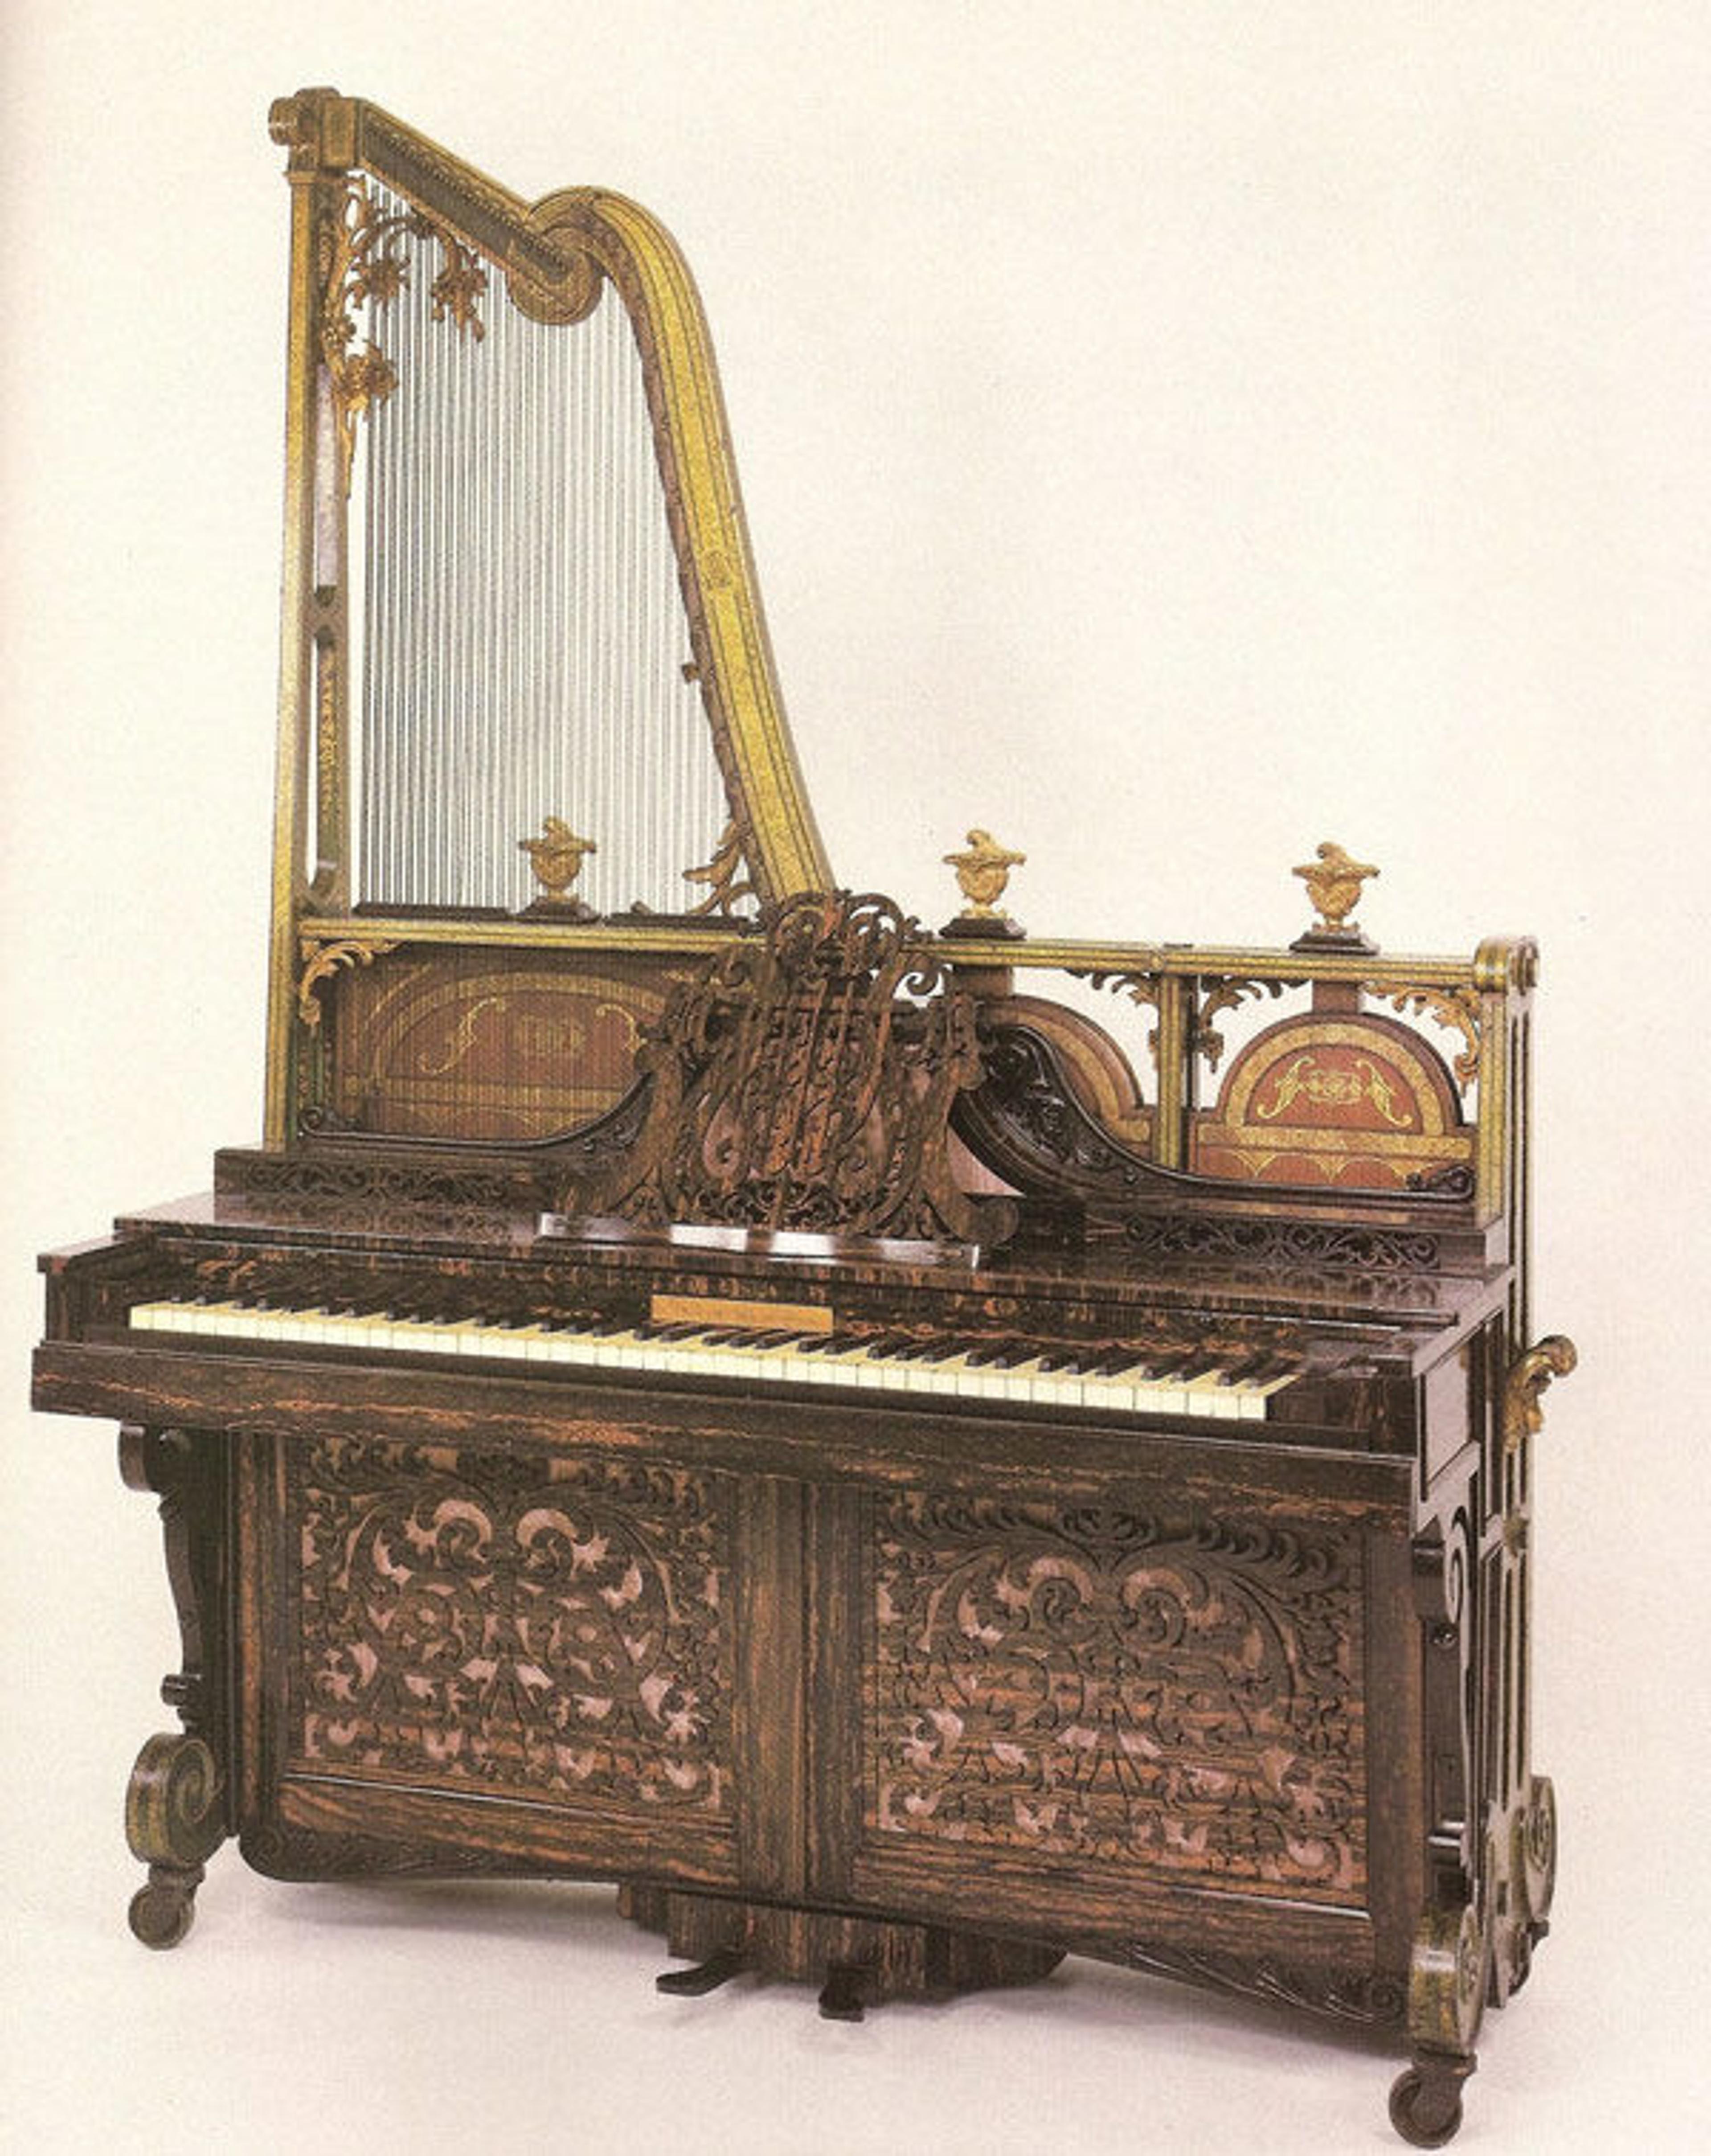 Upright harp piano, 1843. F. Beale & Co., London, England, United Kingdom. Various materials. The Metropolitan Museum of Art, New York, Gift of Mrs. Greenfield Sluder, 1944 (44.58)